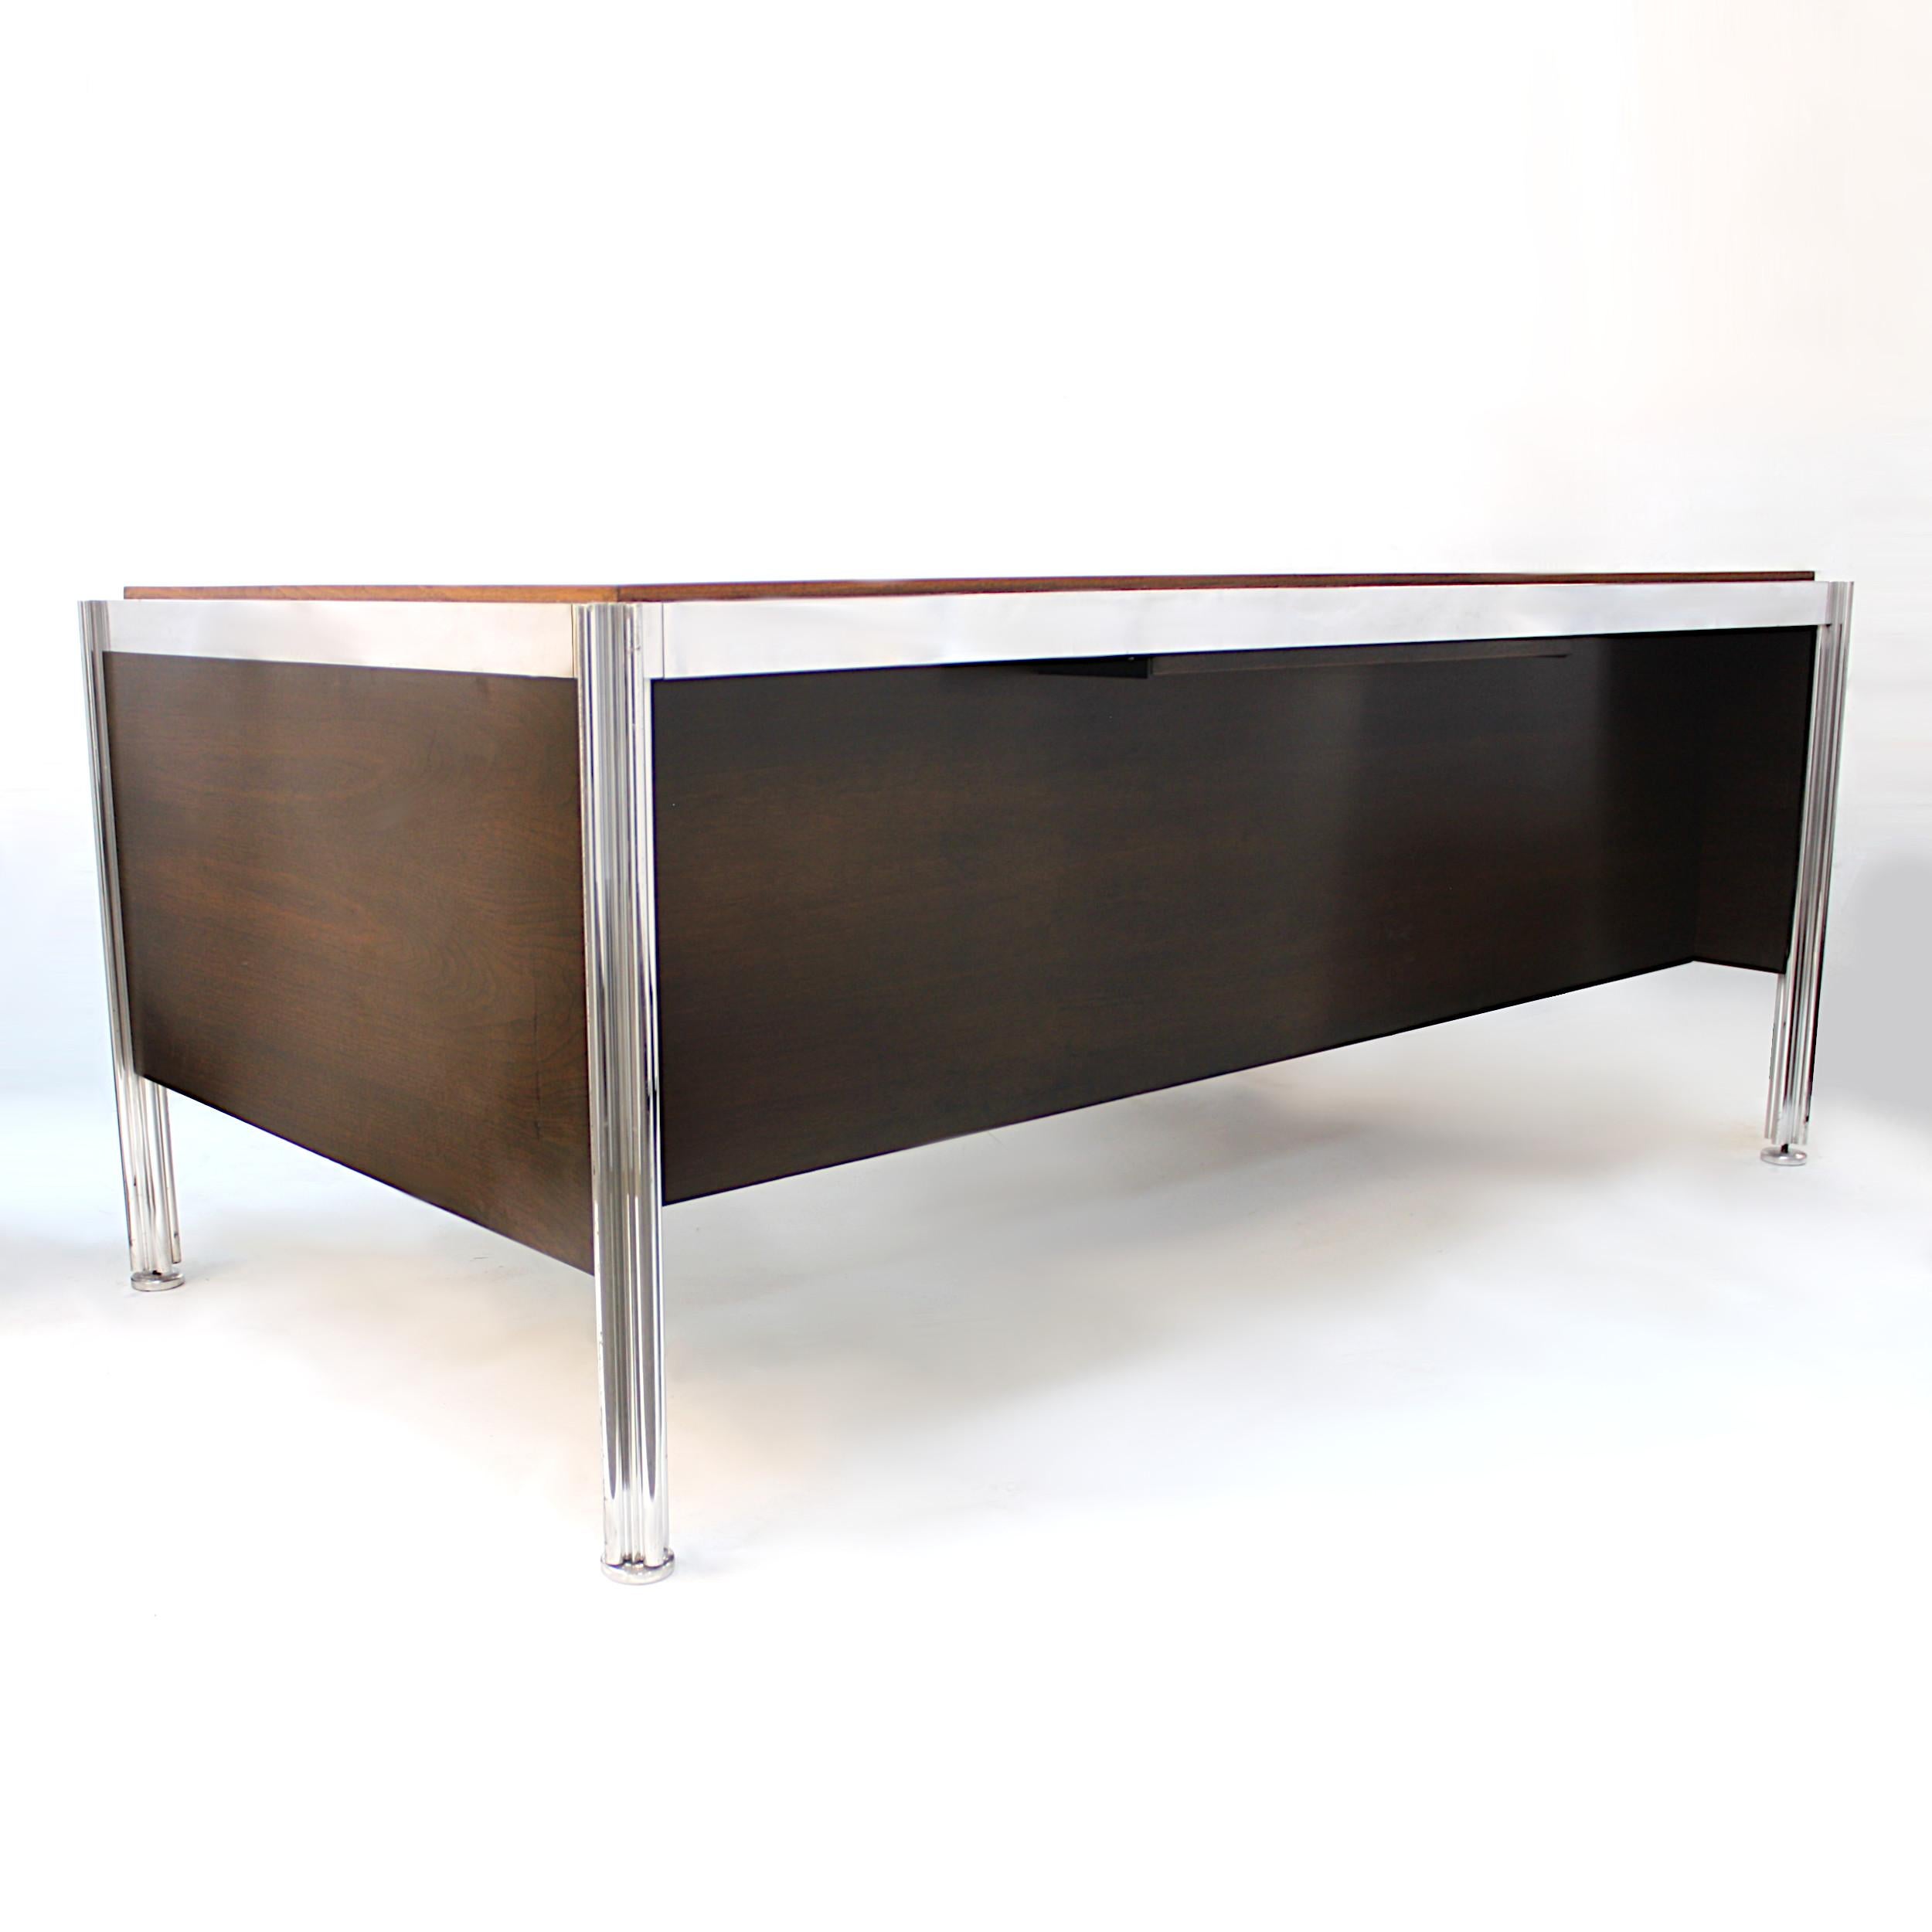 Cast 1970s Mid-Century Modern Walnut and Aluminum Executive Desk by George Ciancimino